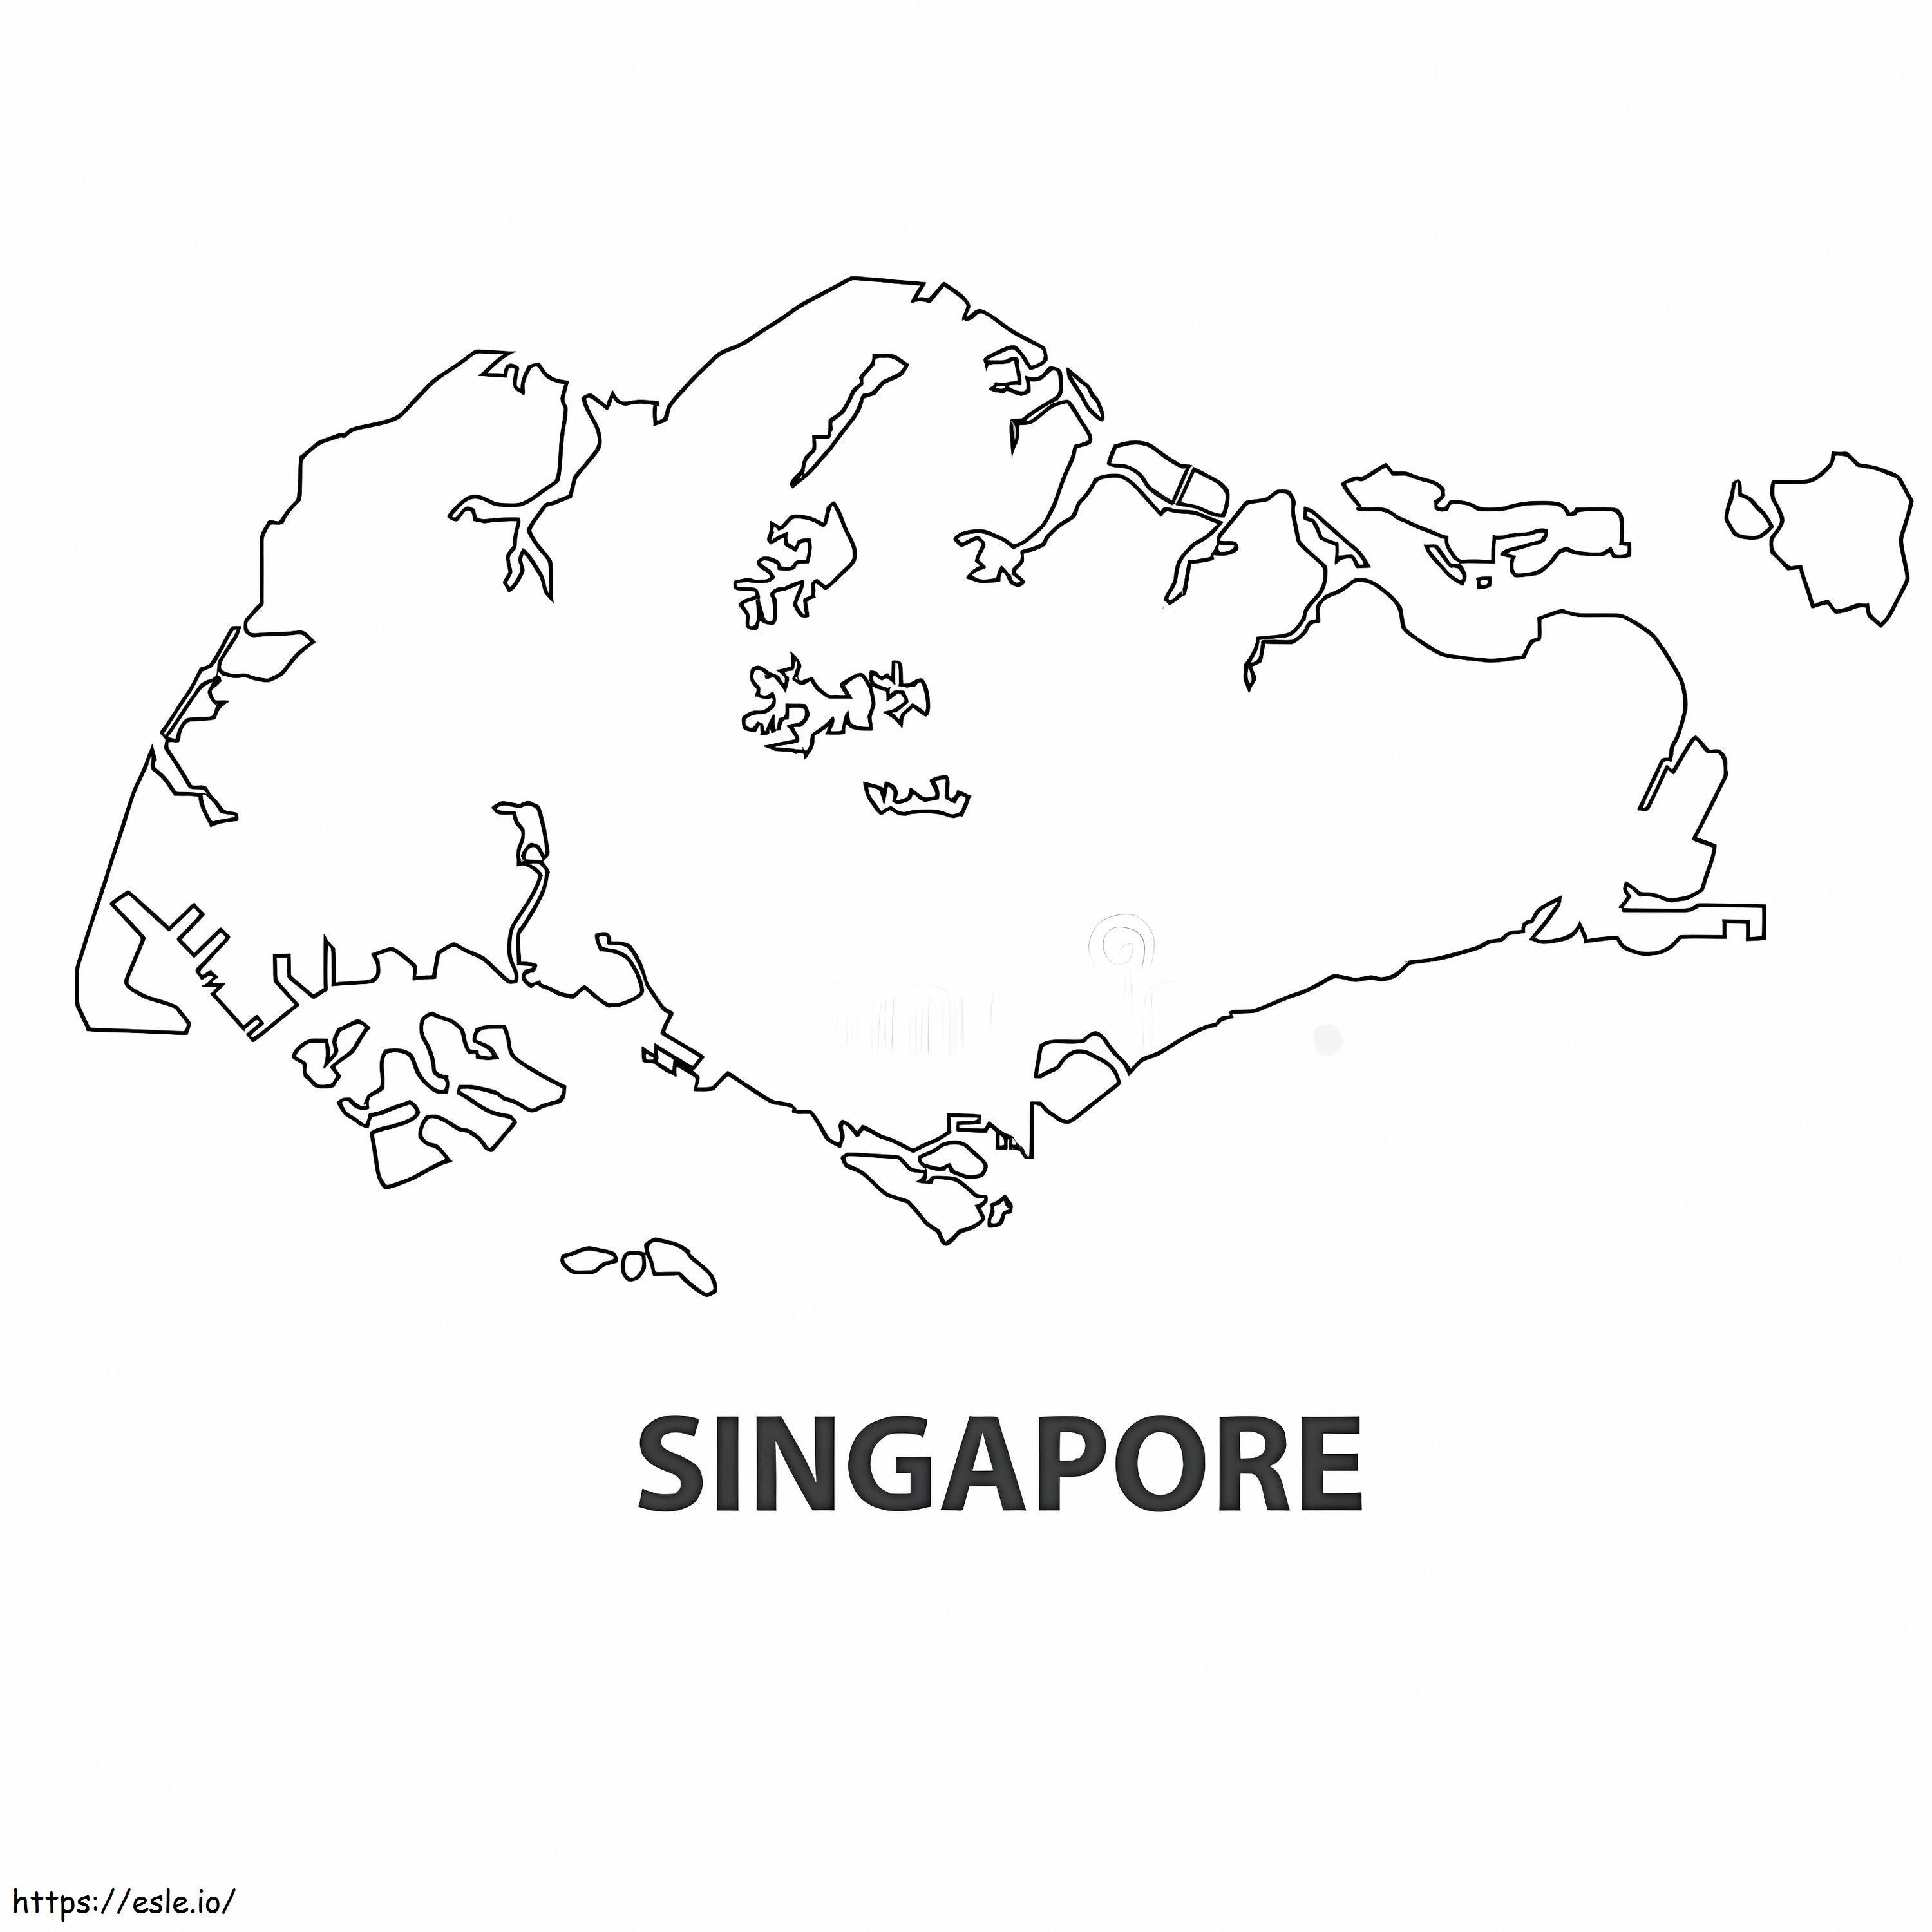 Singapore Map coloring page